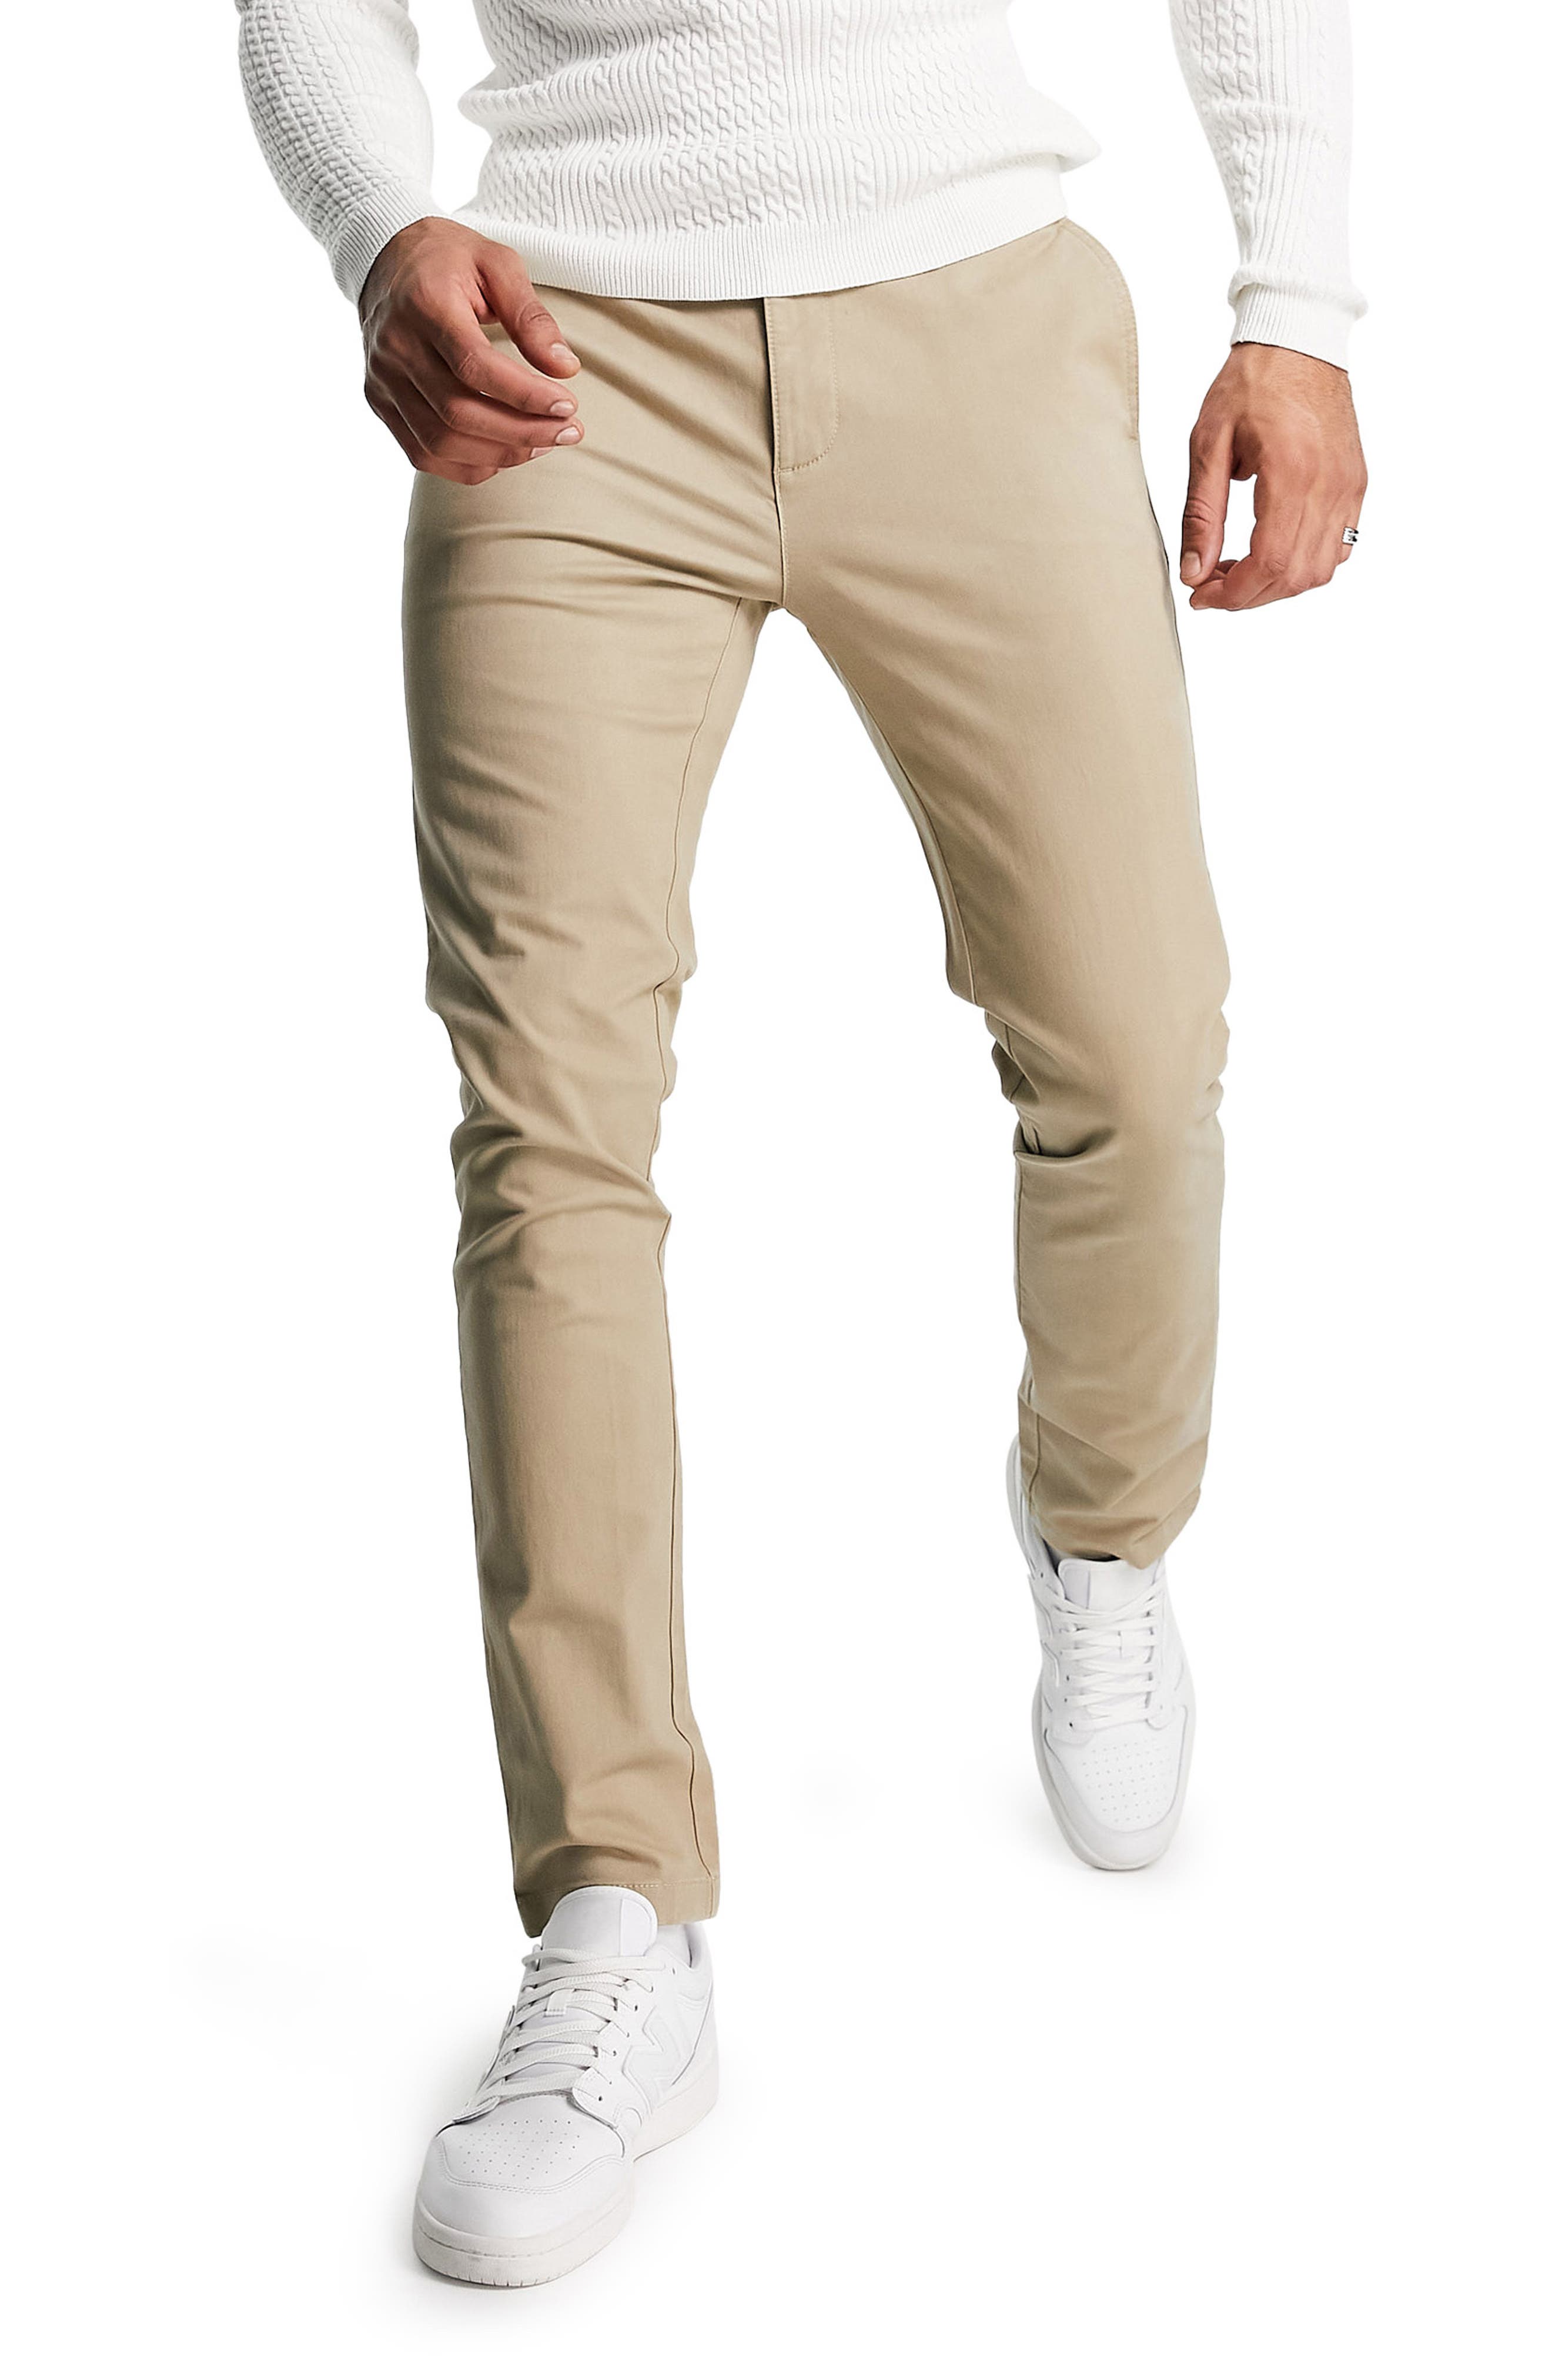 NEW MENS SKINNY STRETCH JEANS Slim Fit Twill Coloured Jeans Pants Chino Trousers 